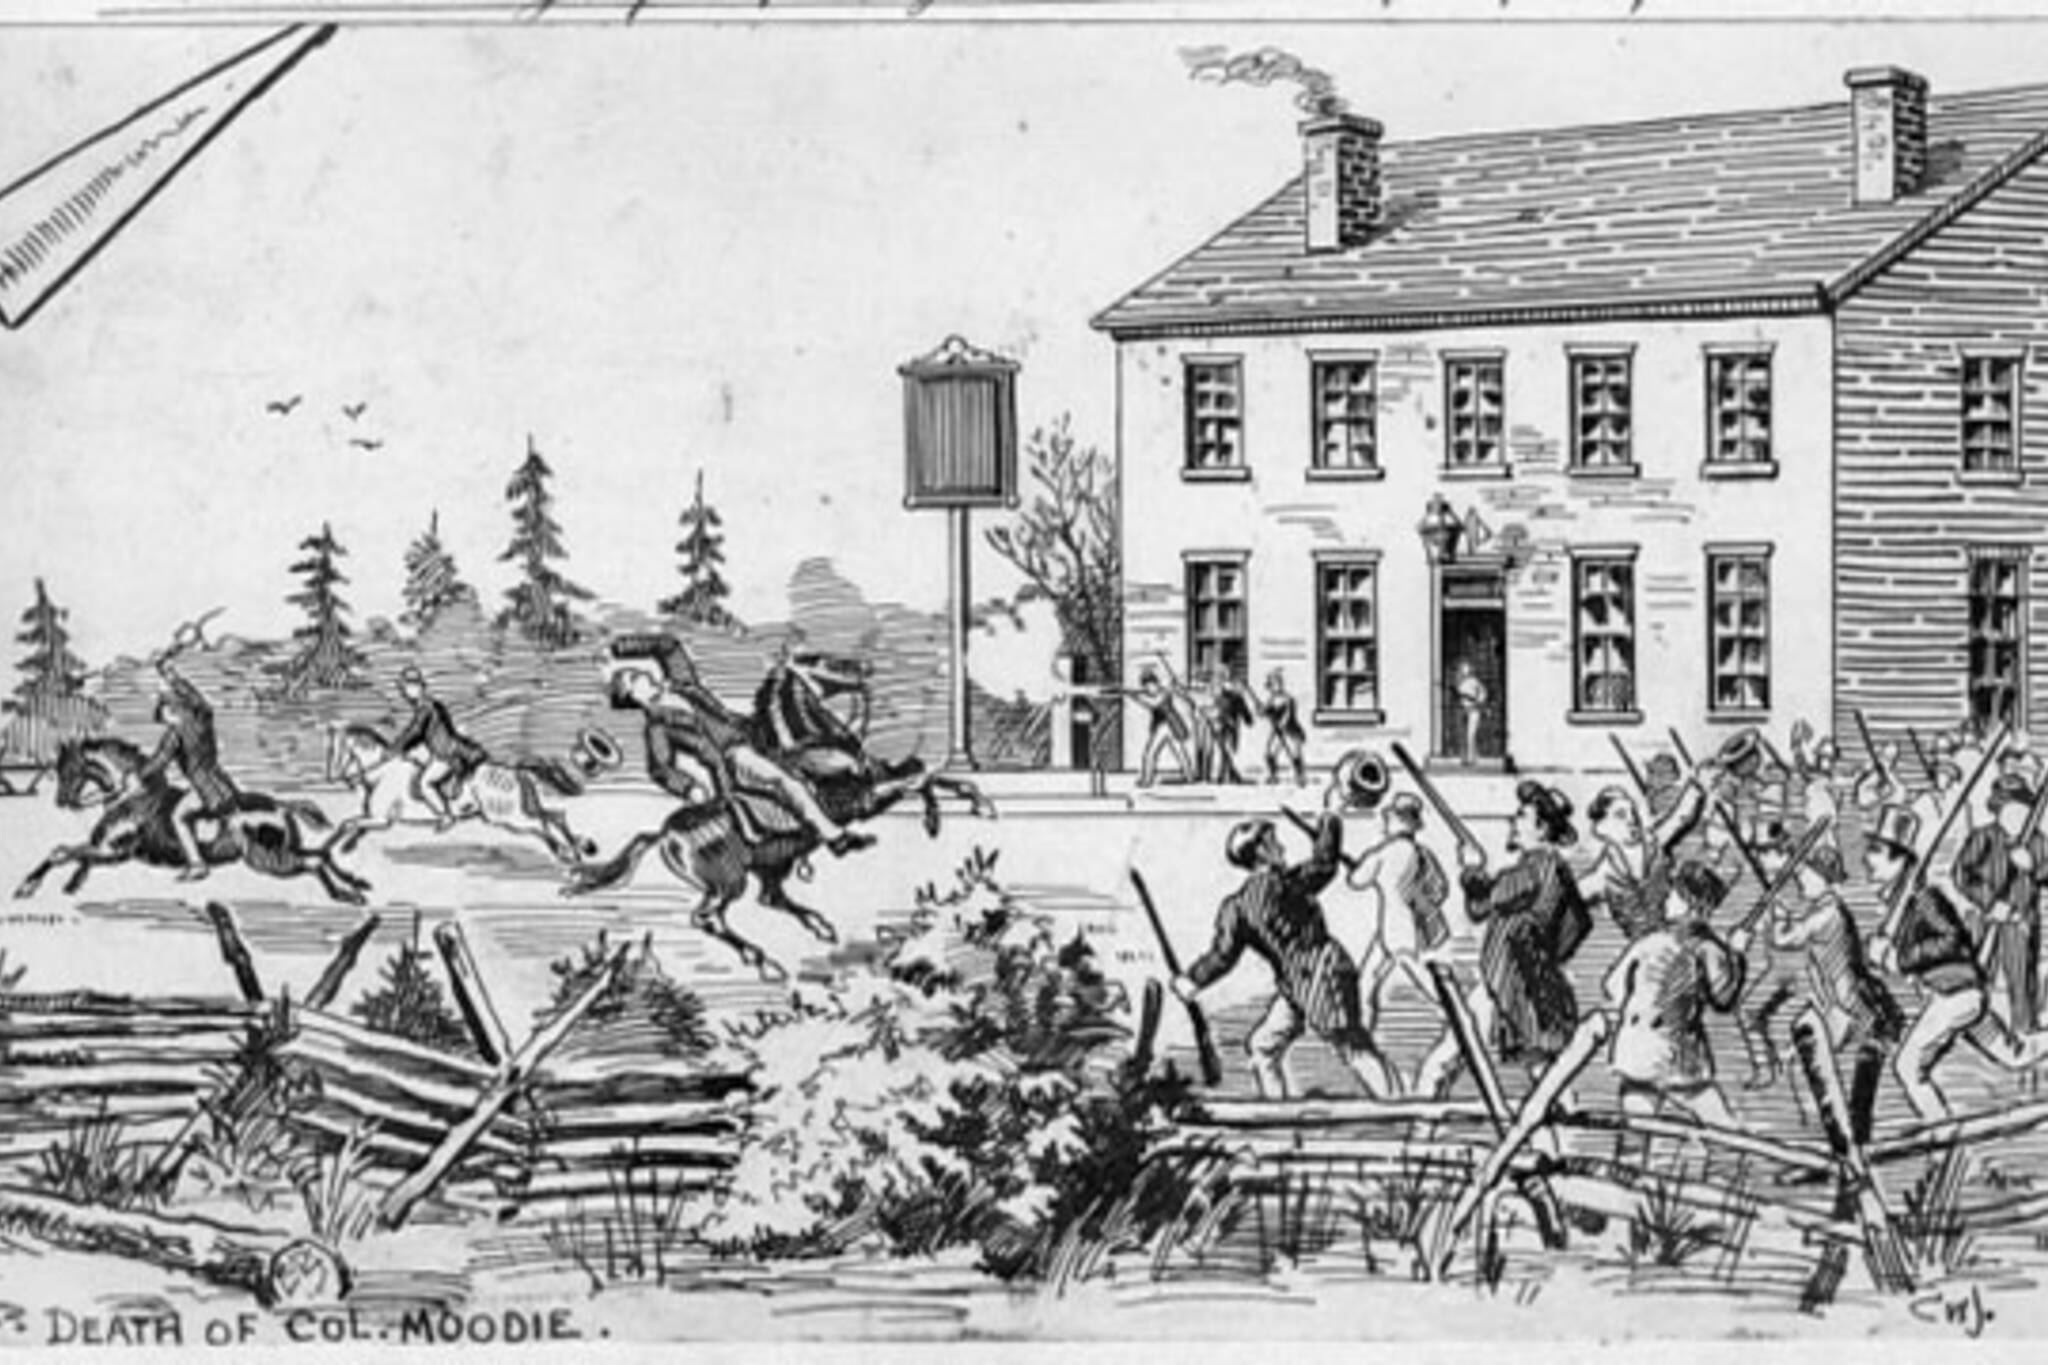 A brief history of the Battle of Montgomery's Tavern